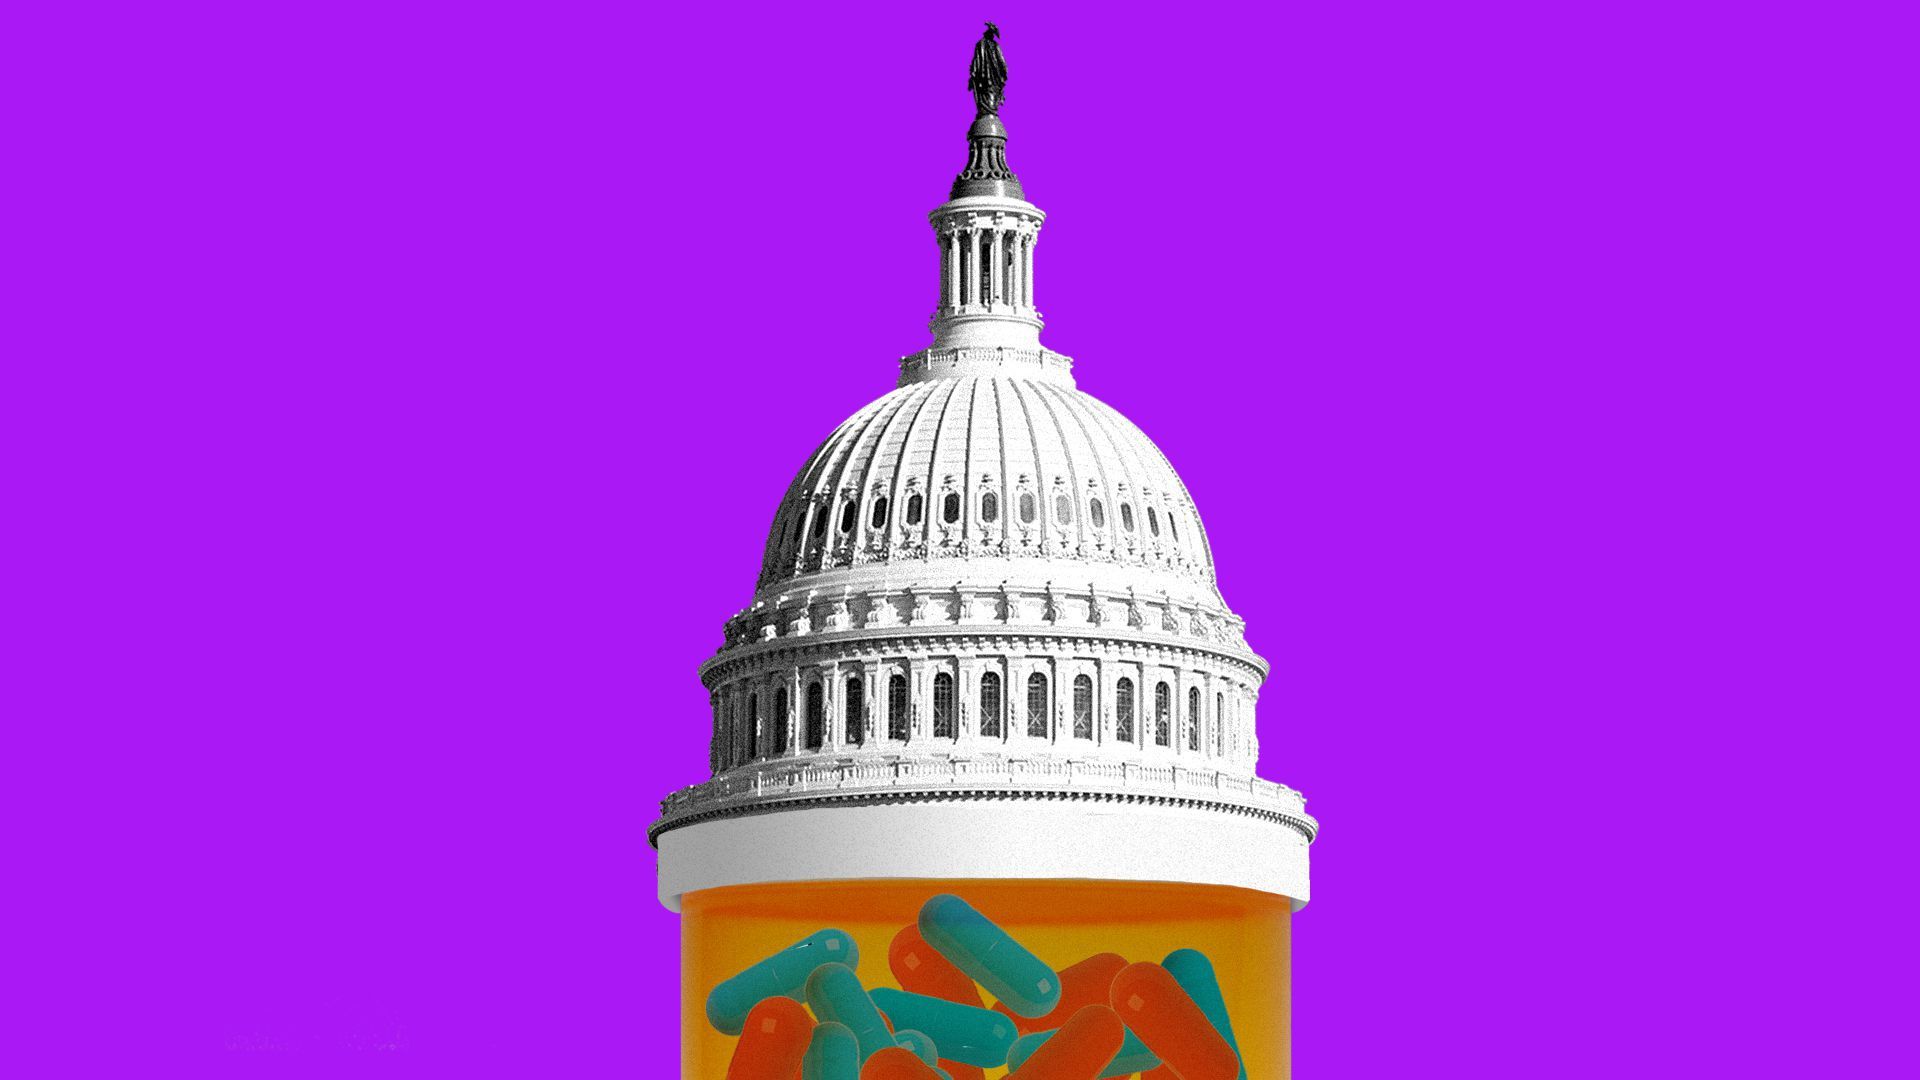 In image of the Capitol Dome atop a prescription drug bottle is seen in an illustration.